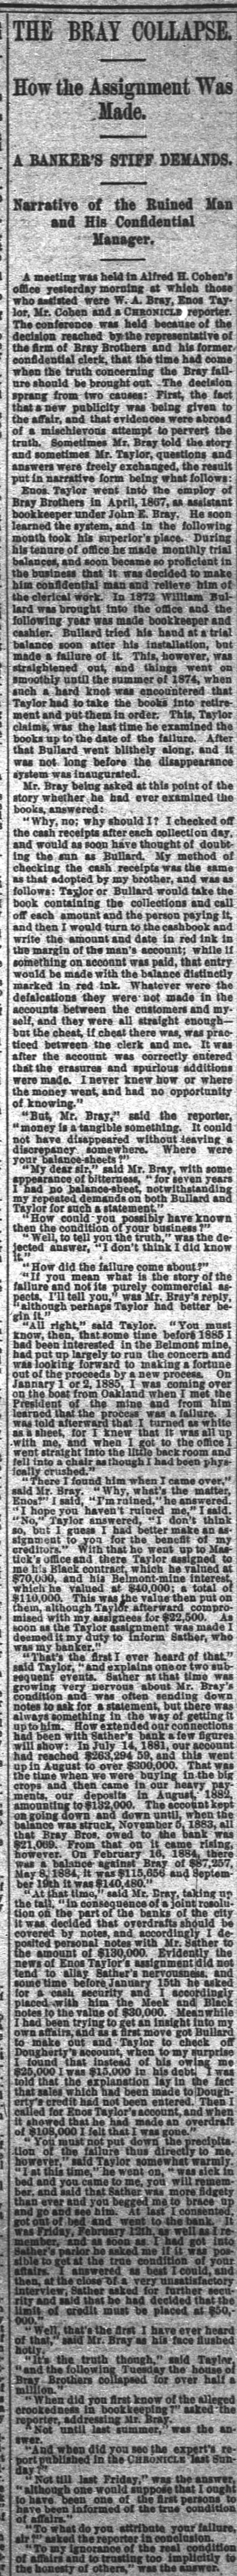 "The Bray Collapse" S.F. Chronicle, March 11, 1887